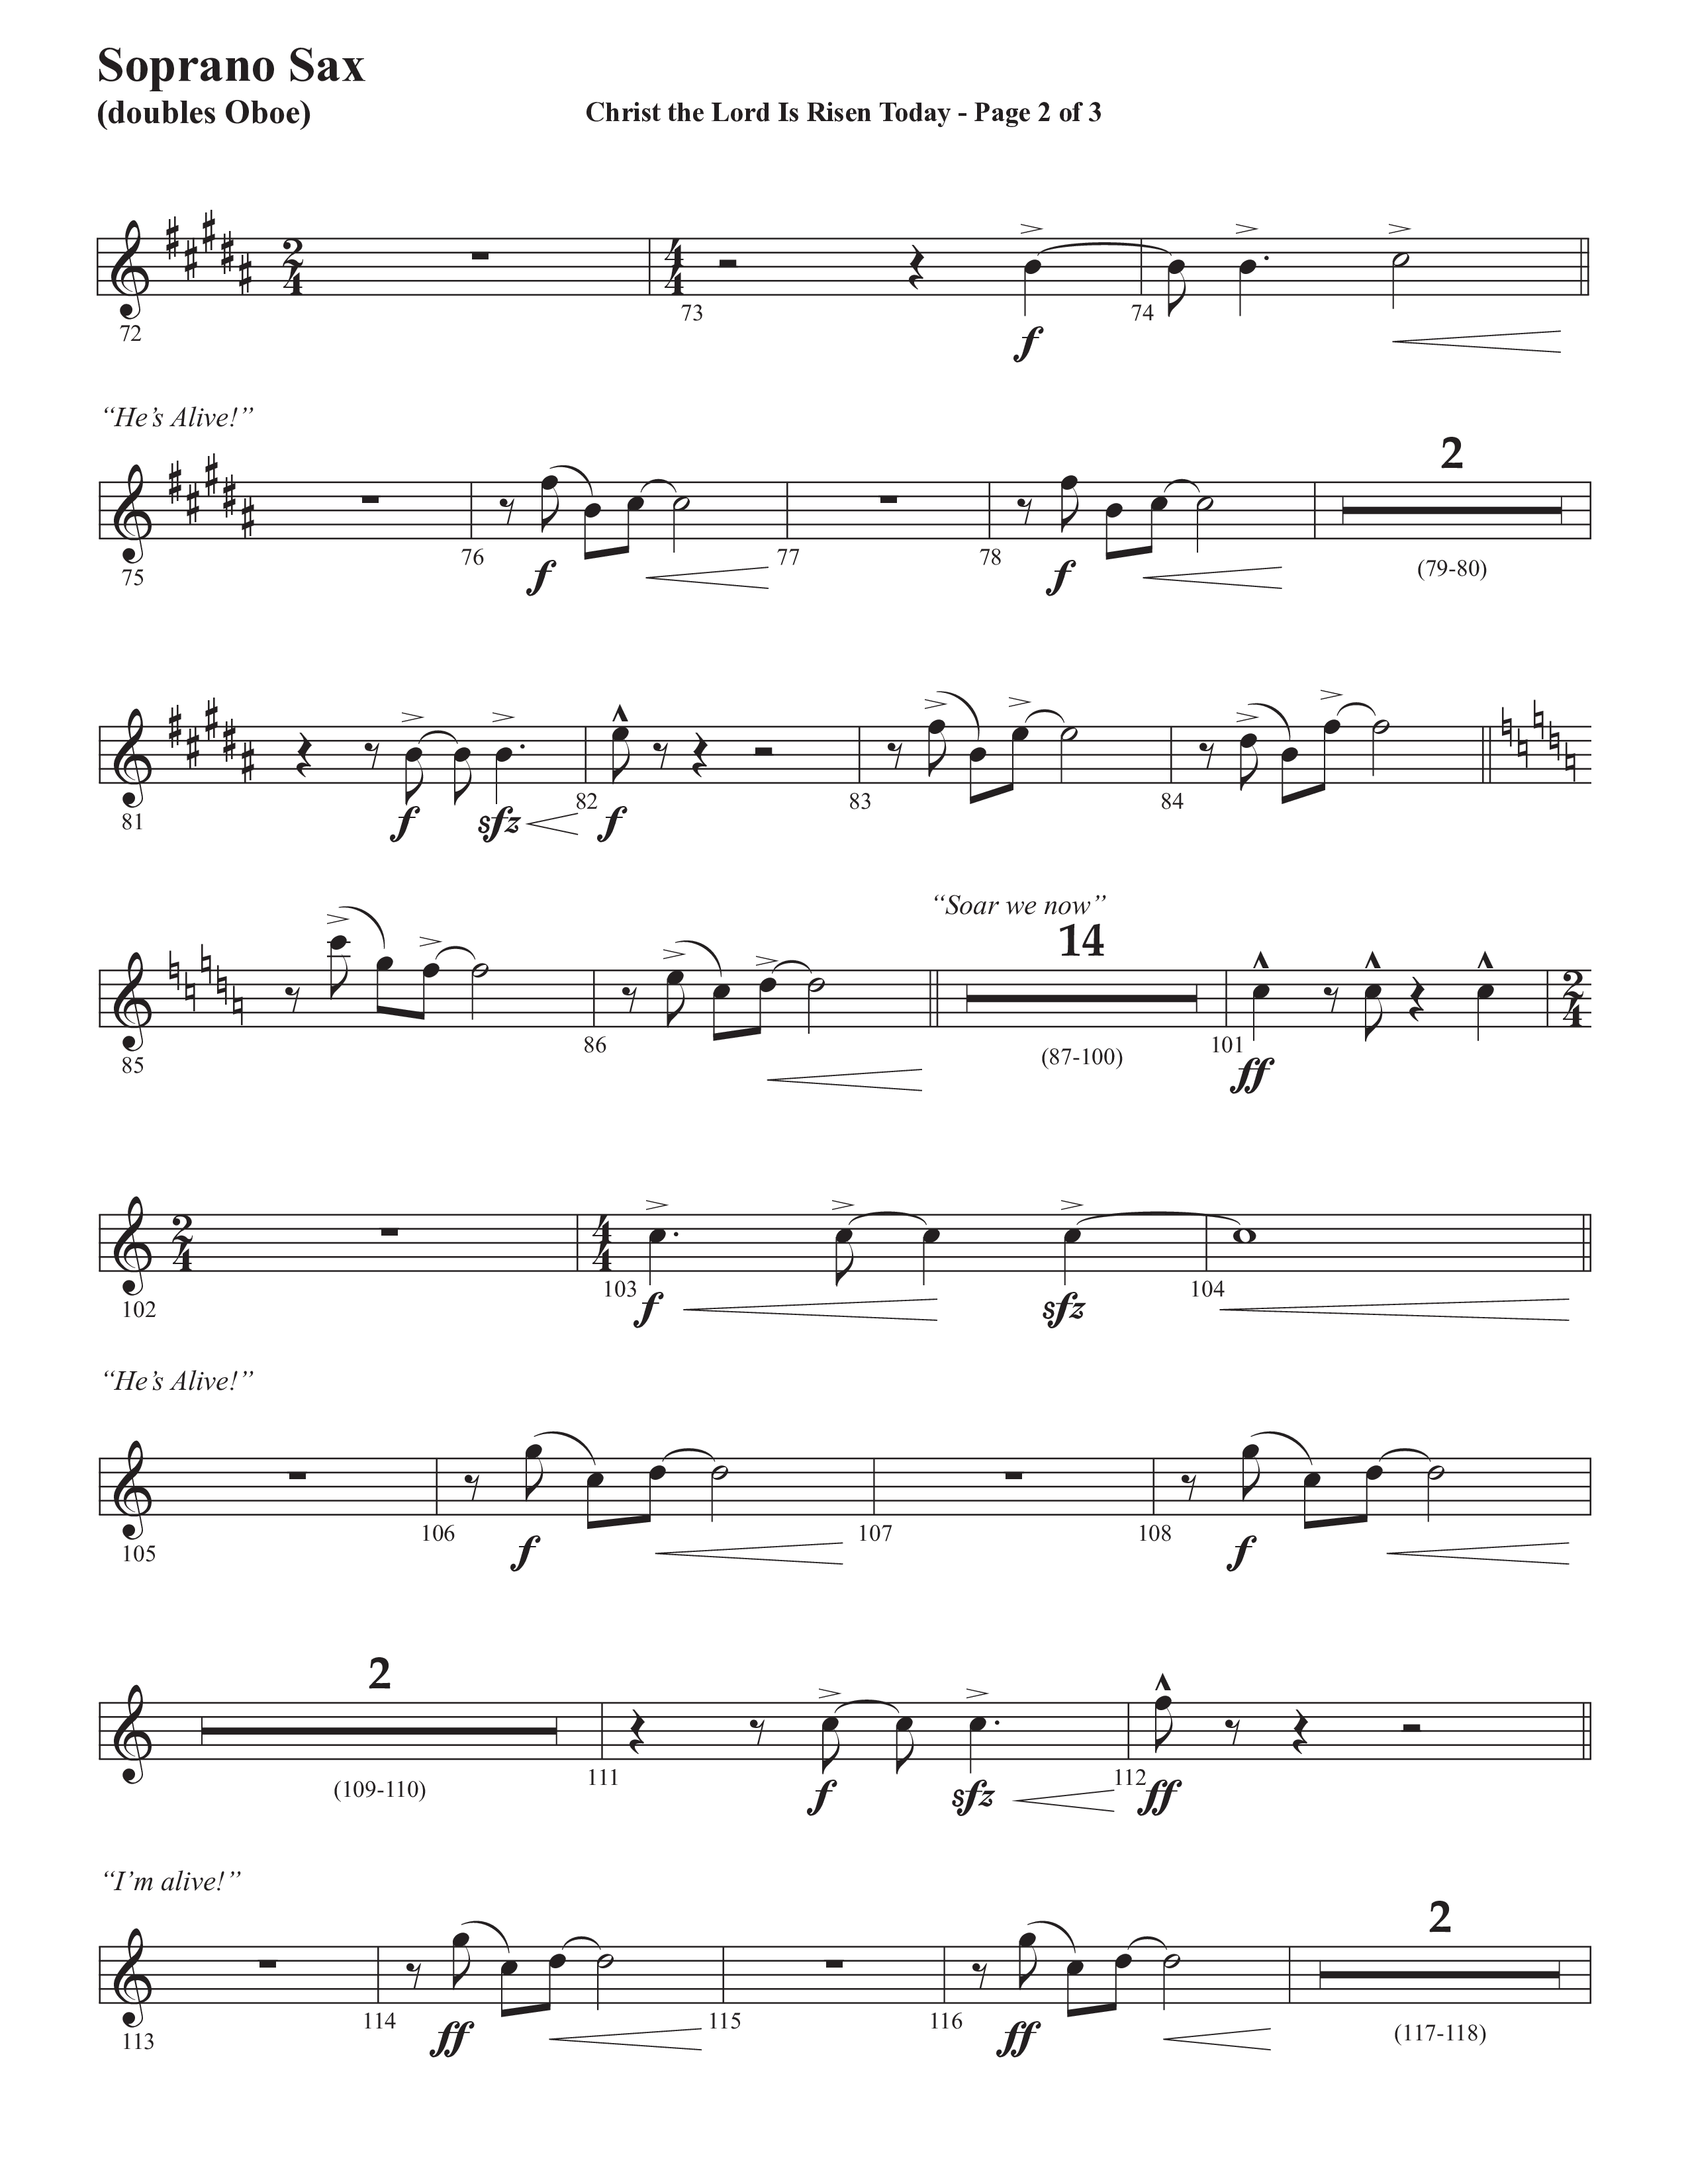 Christ The Lord Is Risen Today (He's Alive) (Choral Anthem SATB) Soprano Sax (Semsen Music / Arr. John Bolin / Orch. Cliff Duren)